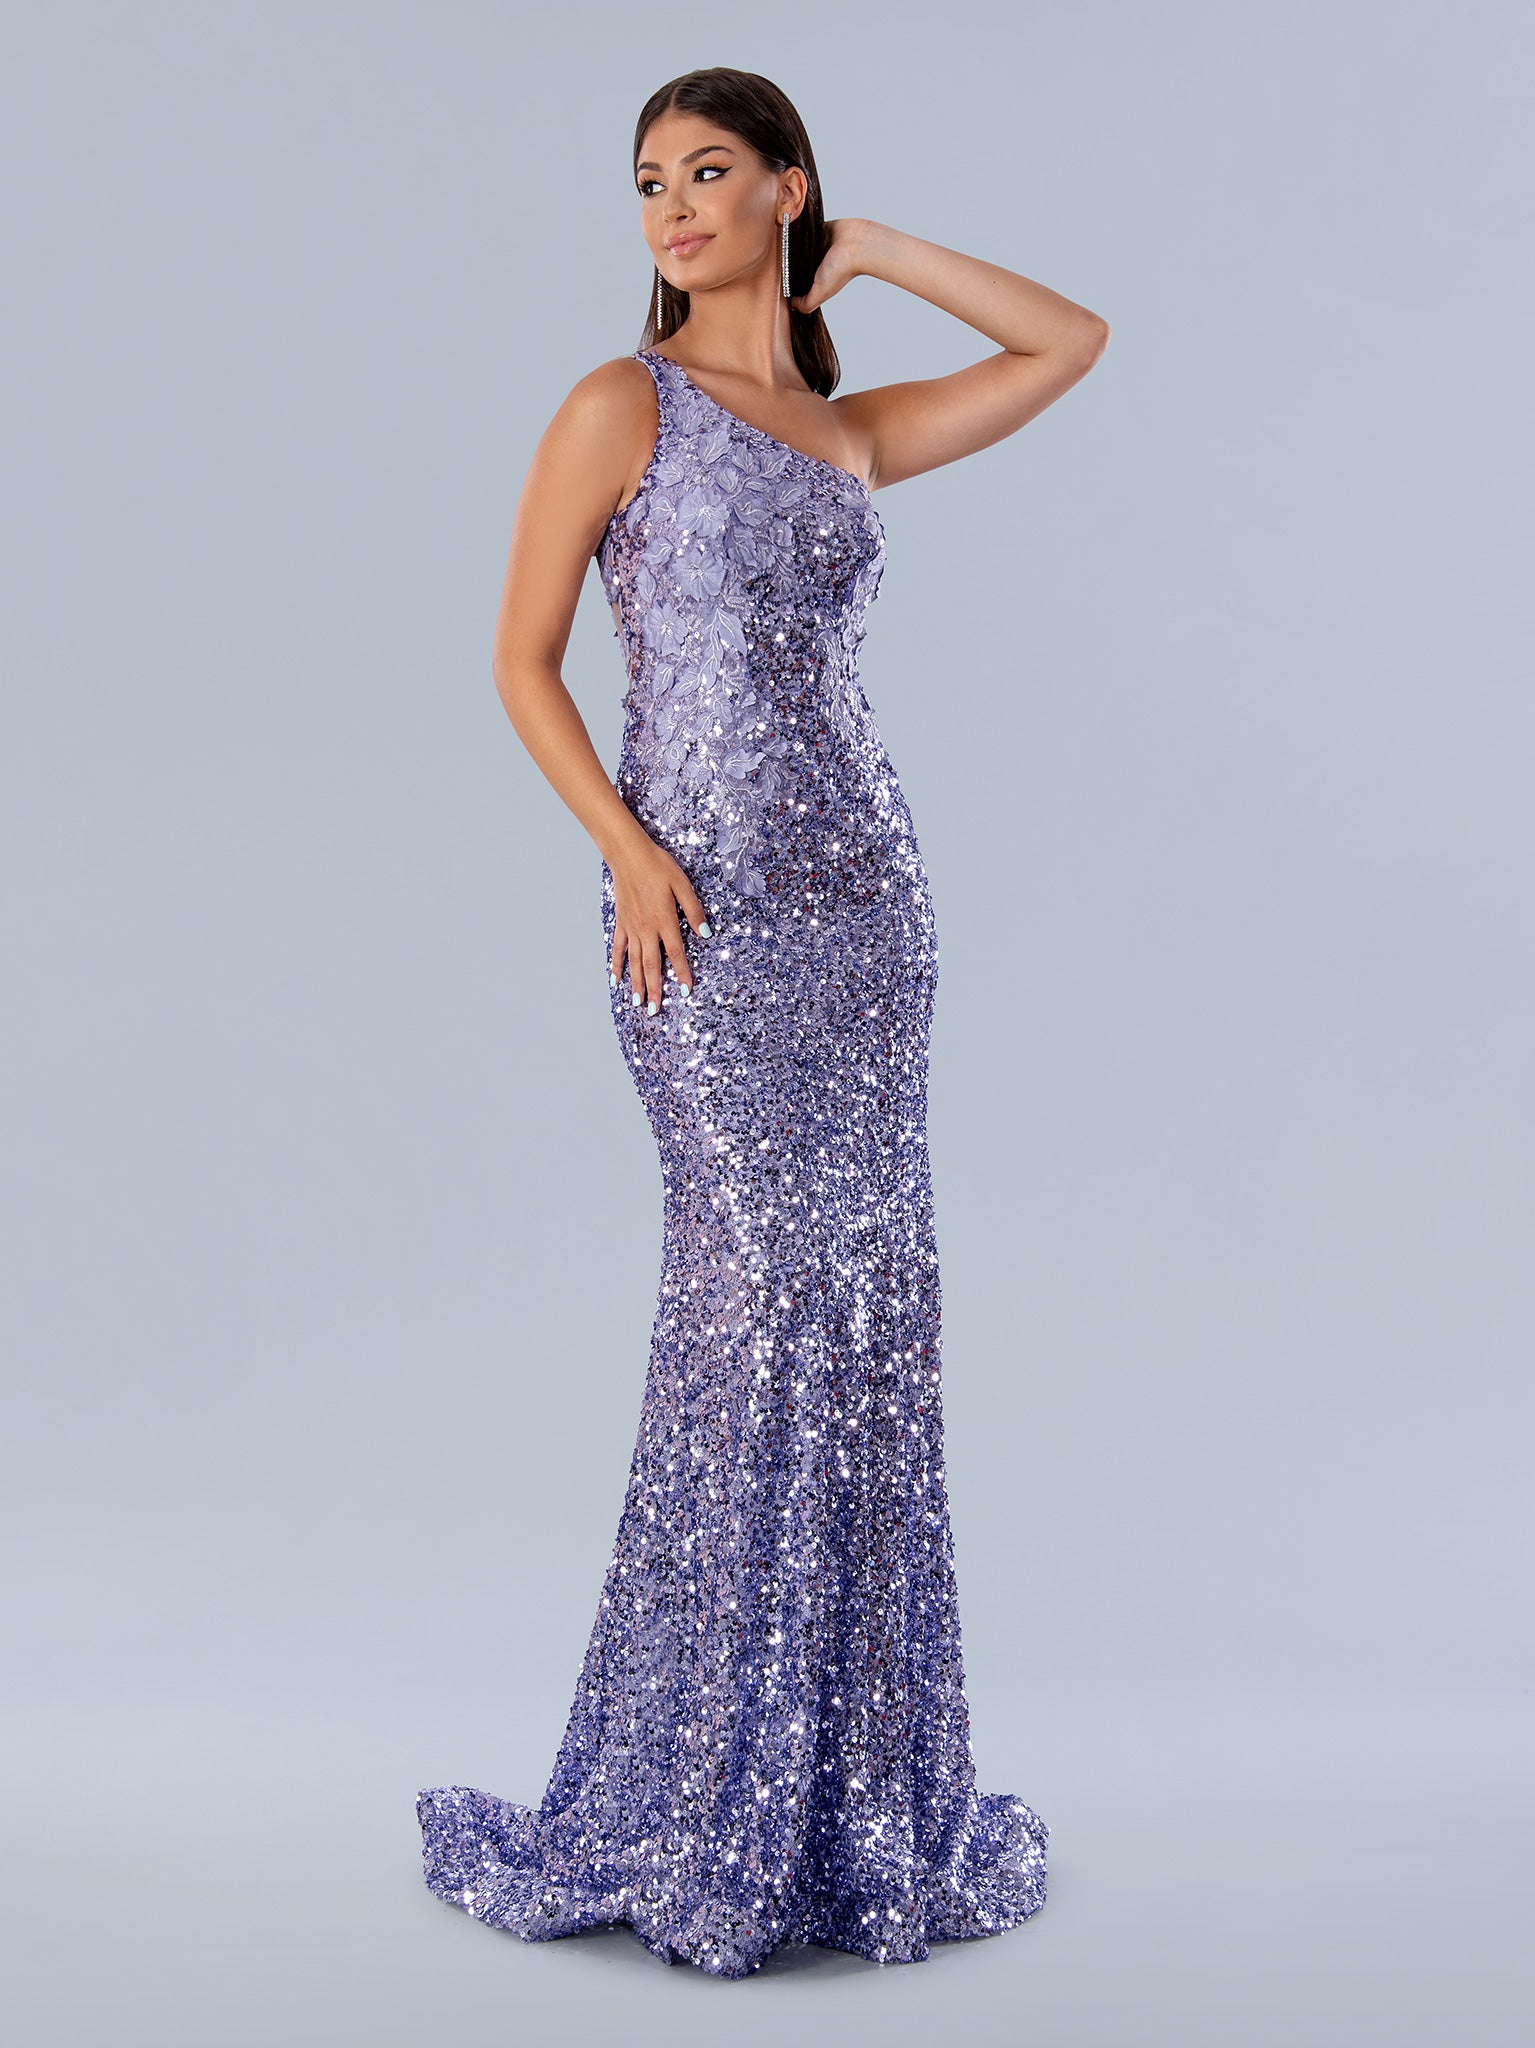 Stella Couture 24155 is a stunning One Shoulder Sequin Lace Prom Dress with a Sheer Back and 3d floral lace appliques. This elegant formal gown will make the perfect statement and turn heads at your special event.  Sizes: 0-16  Colors: Lilac